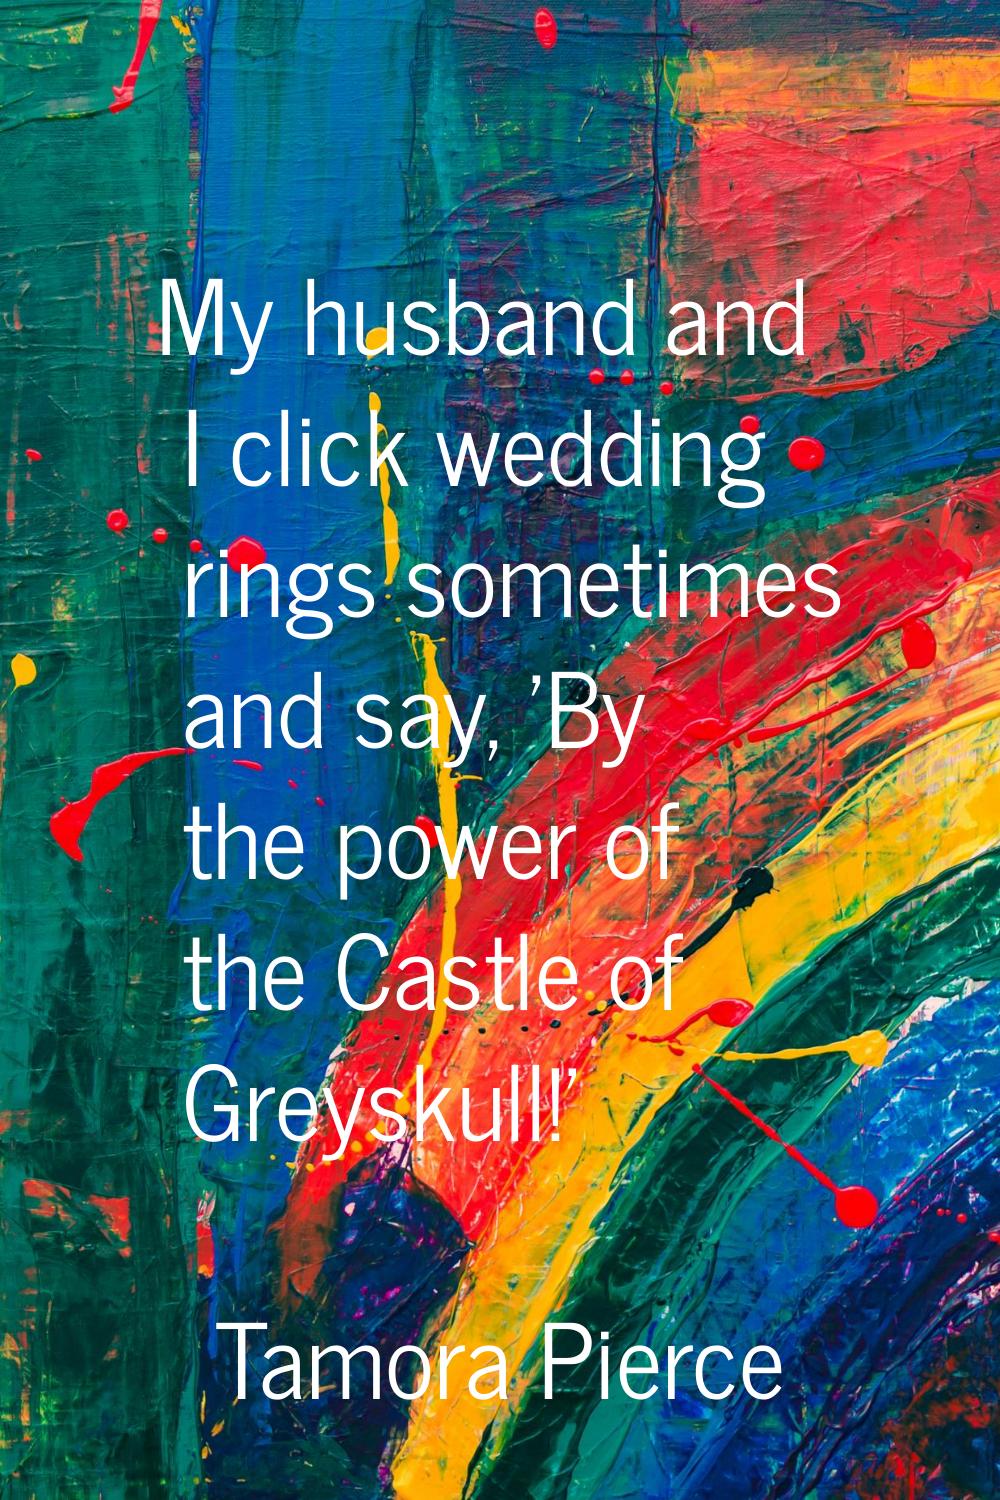 My husband and I click wedding rings sometimes and say, 'By the power of the Castle of Greyskull!'